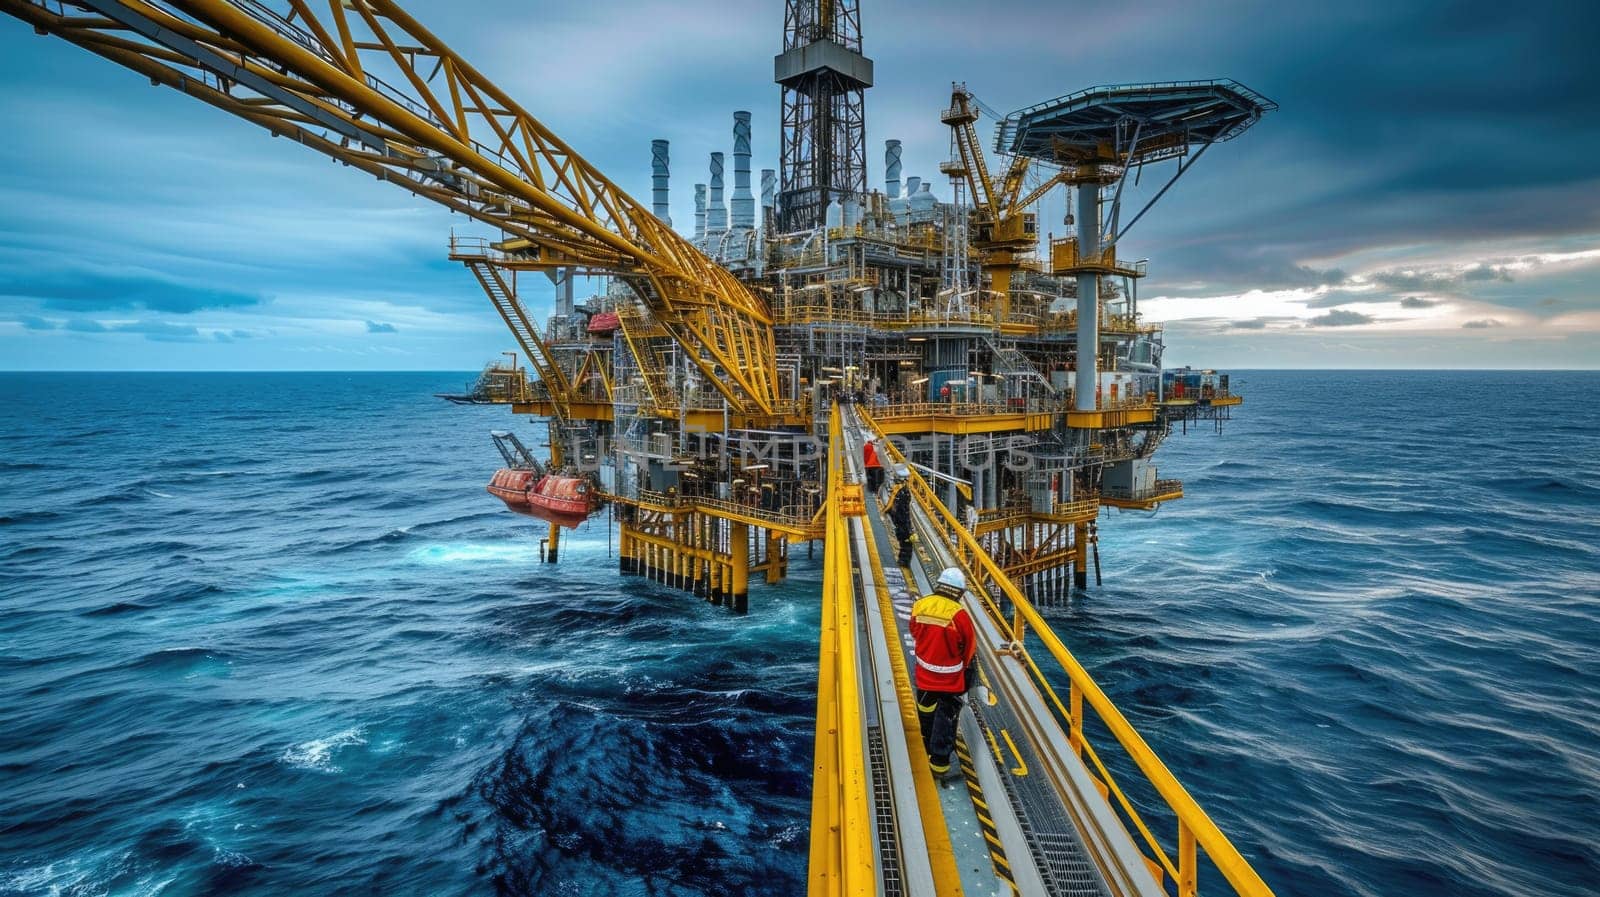 The naval architecture of an oil rig floating in the vast ocean, surrounded by water and sky, showcases engineering marvel amidst fluid and liquid environment. AIG41